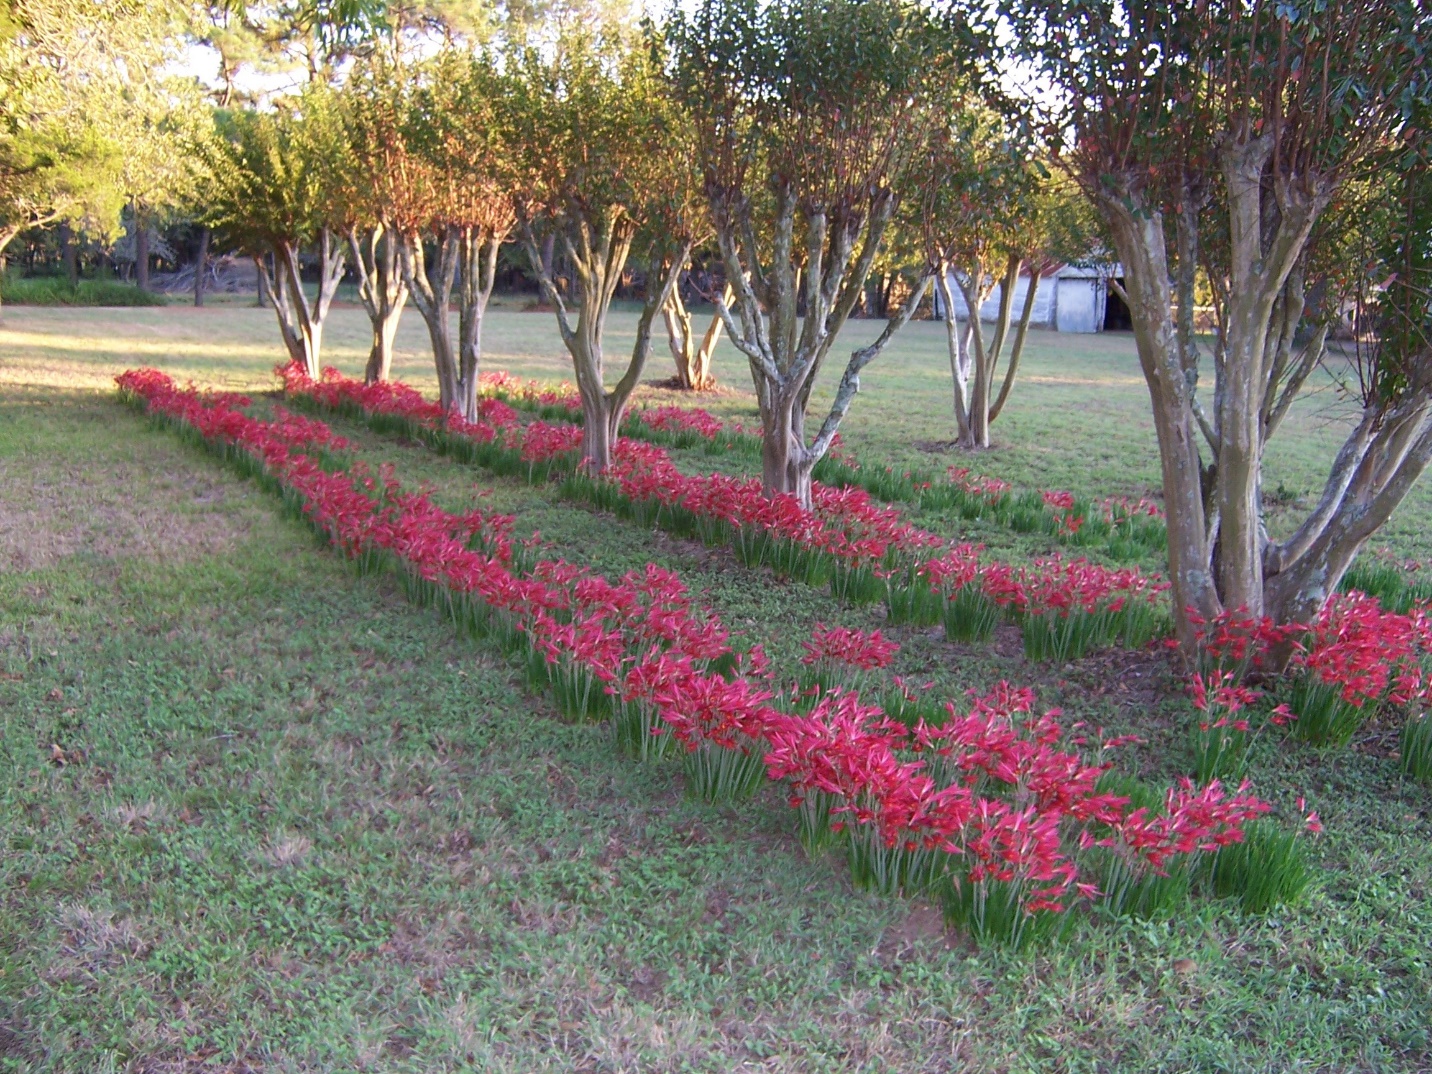 A picture containing schoolhouse lilies (Rhodophiala bifida) also known as oxblood lilies growing with crapemyrtles in Central Texas.